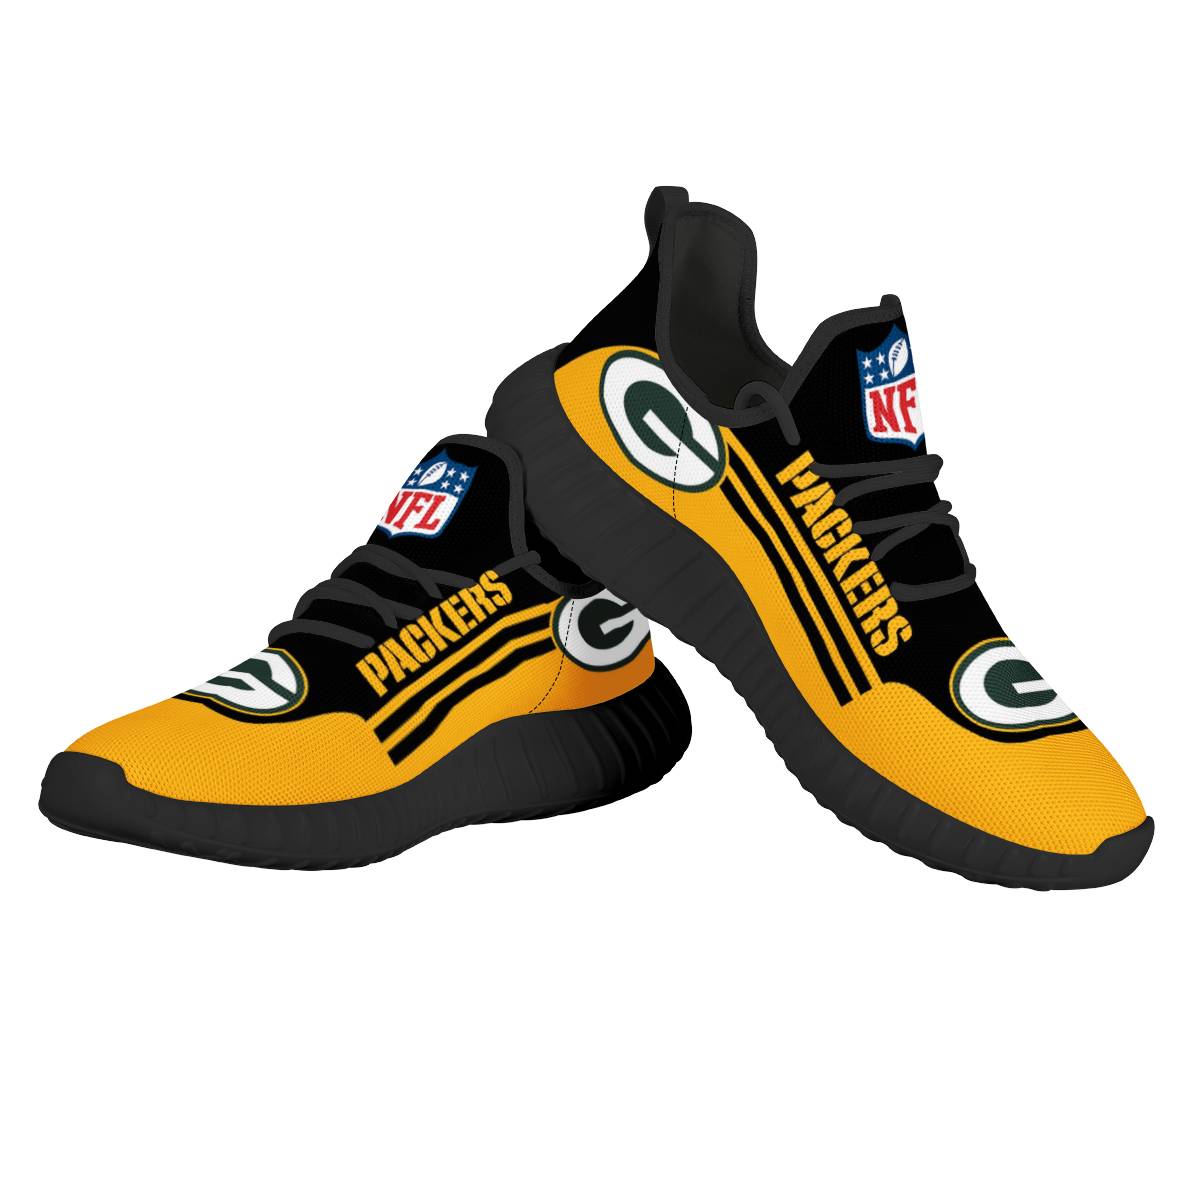 Men's NFL Green Bay Packers Mesh Knit Sneakers/Shoes 007